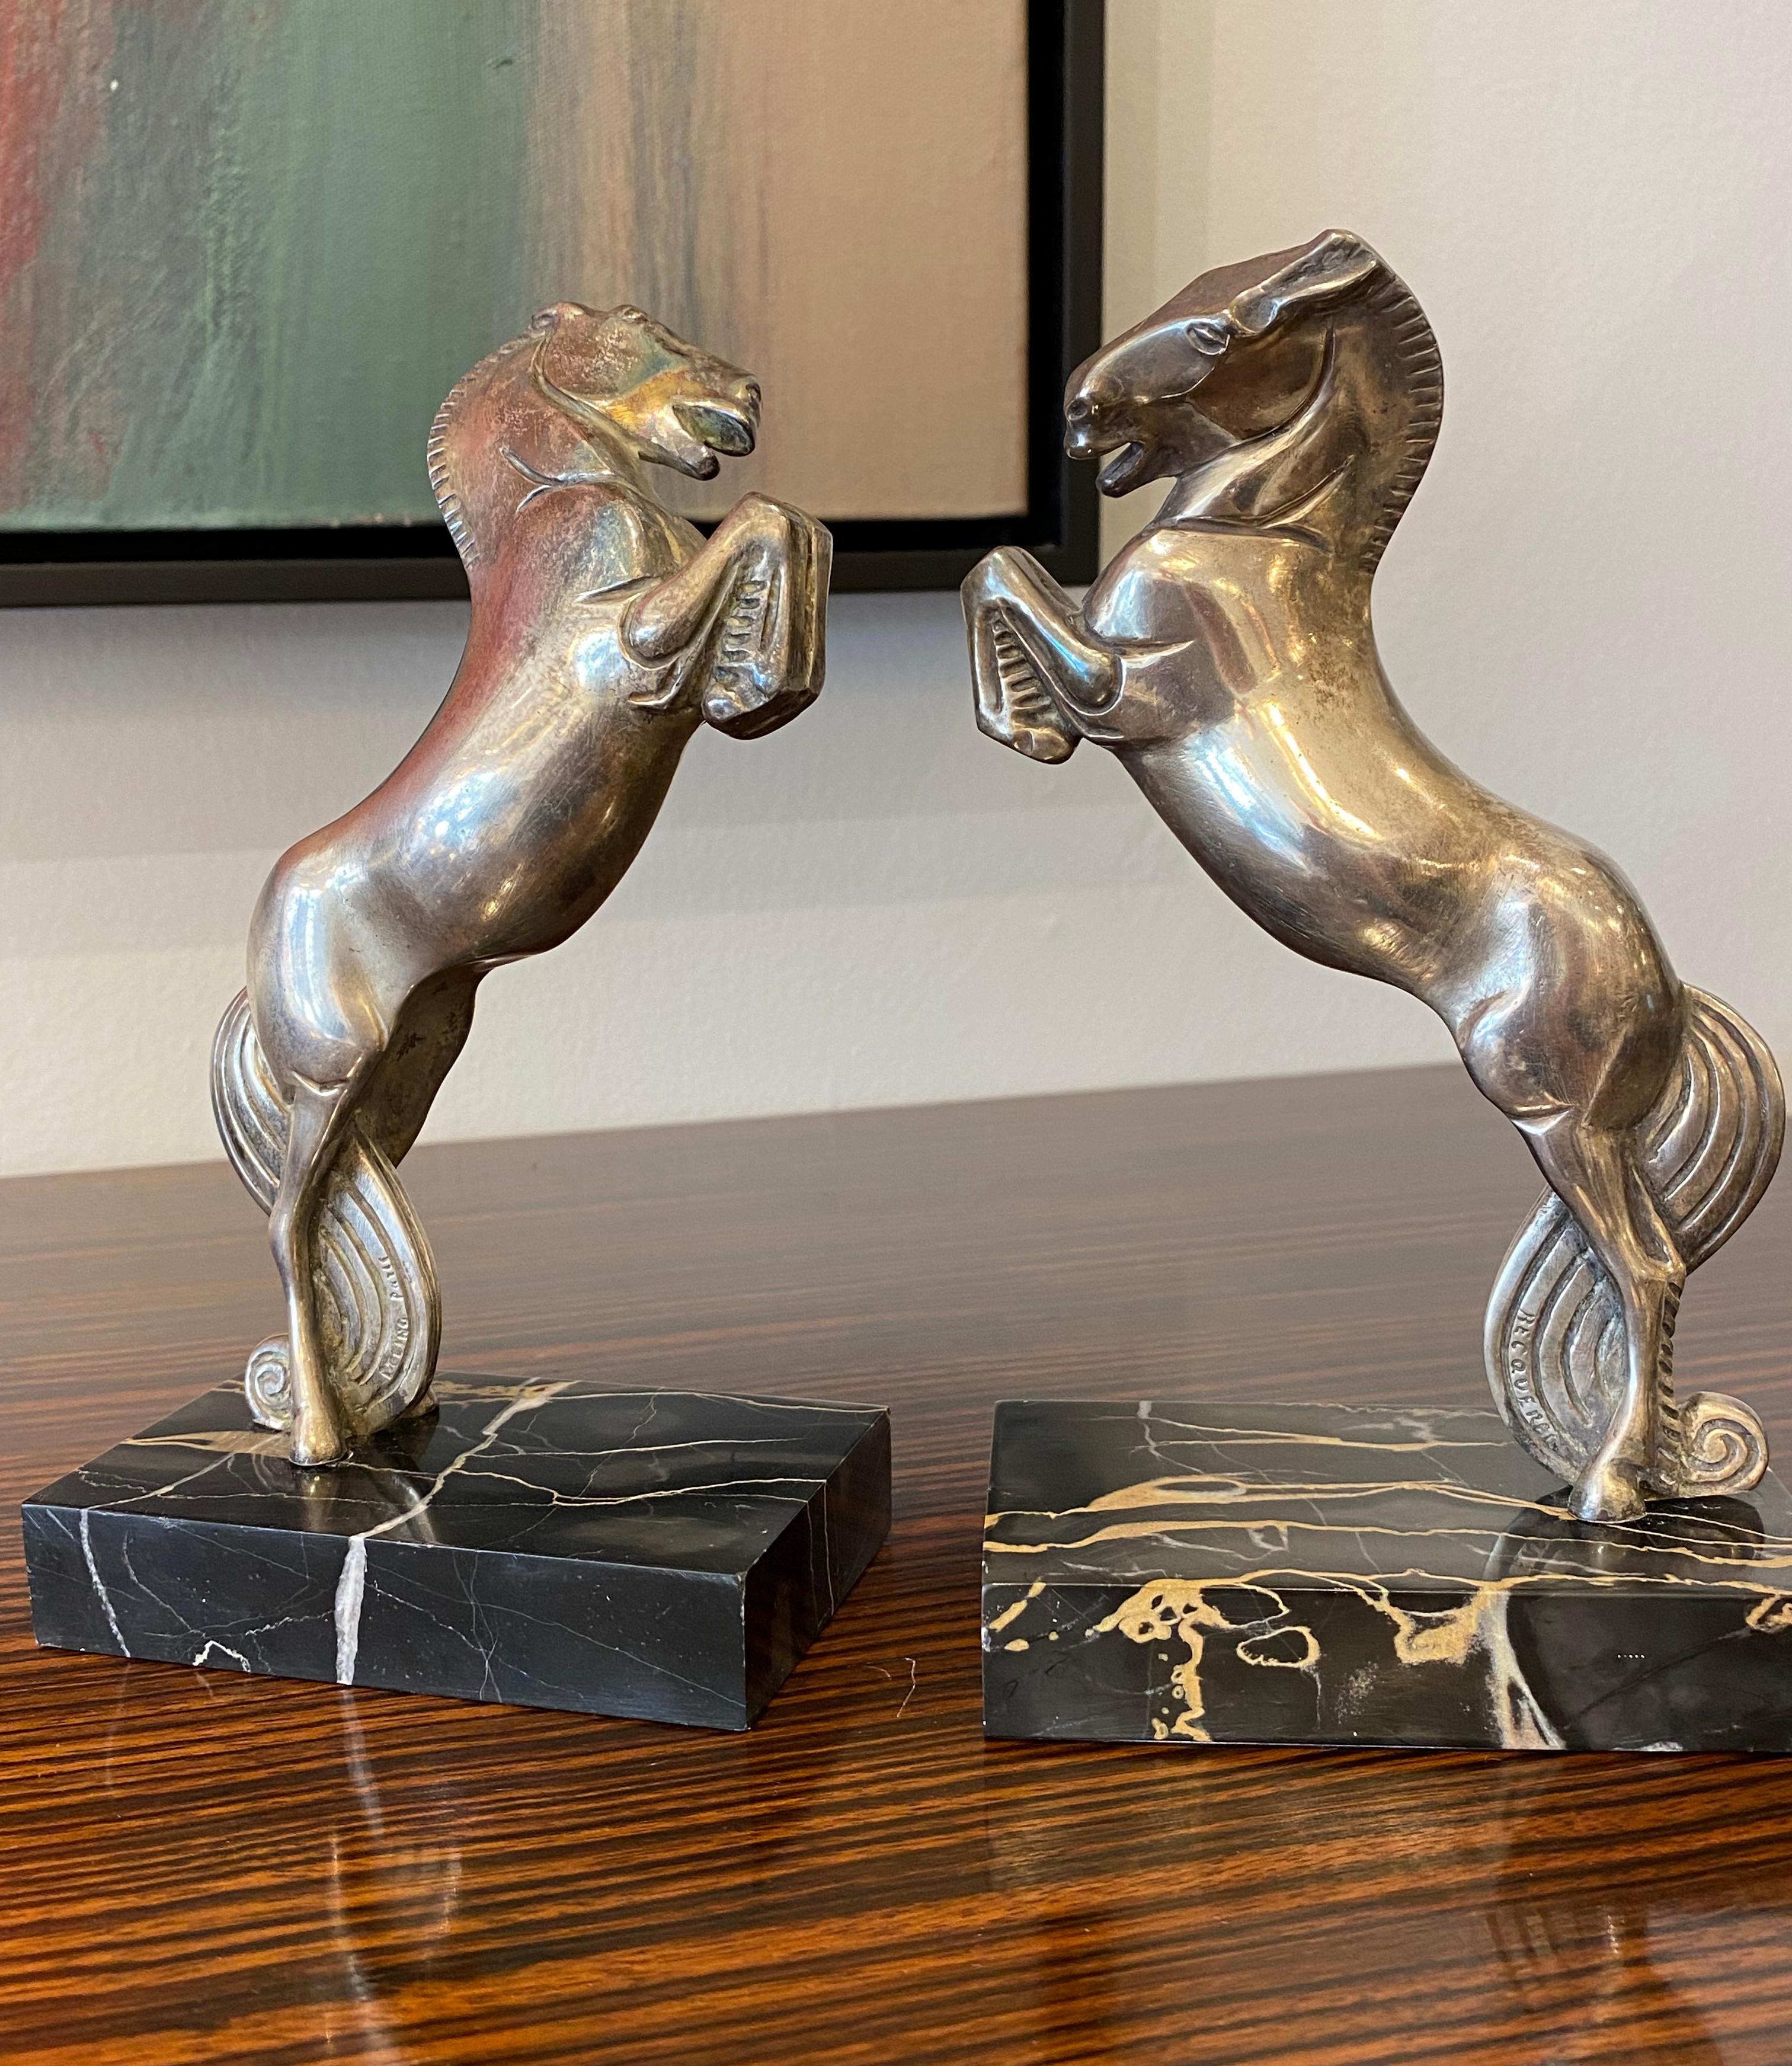 Pair of silver plated bronze bookends depicting two horses seating on a marble by André Vincent Becquerel
Made in France
Circa:1930
Signature: Becquerel and Etling-Paris.